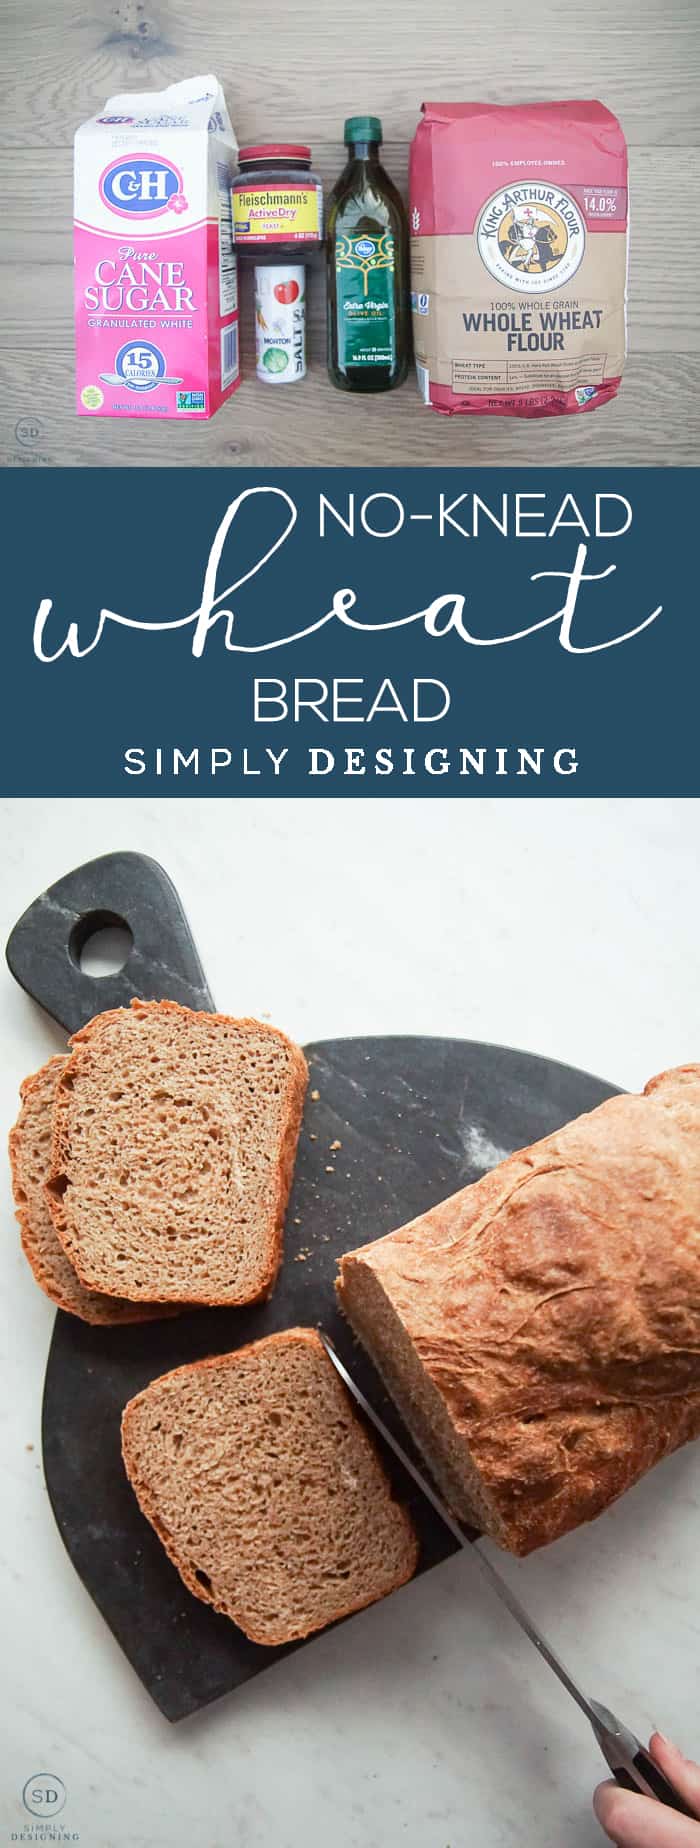 https://simplydesigning.net/wp-content/uploads/2020/04/This-Whole-Wheat-No-Knead-Bread-is-so-simple-to-make-only-takes-about-5-minutes-of-hands-on-time-and-is-so-light-fluffy-and-delicious.jpg